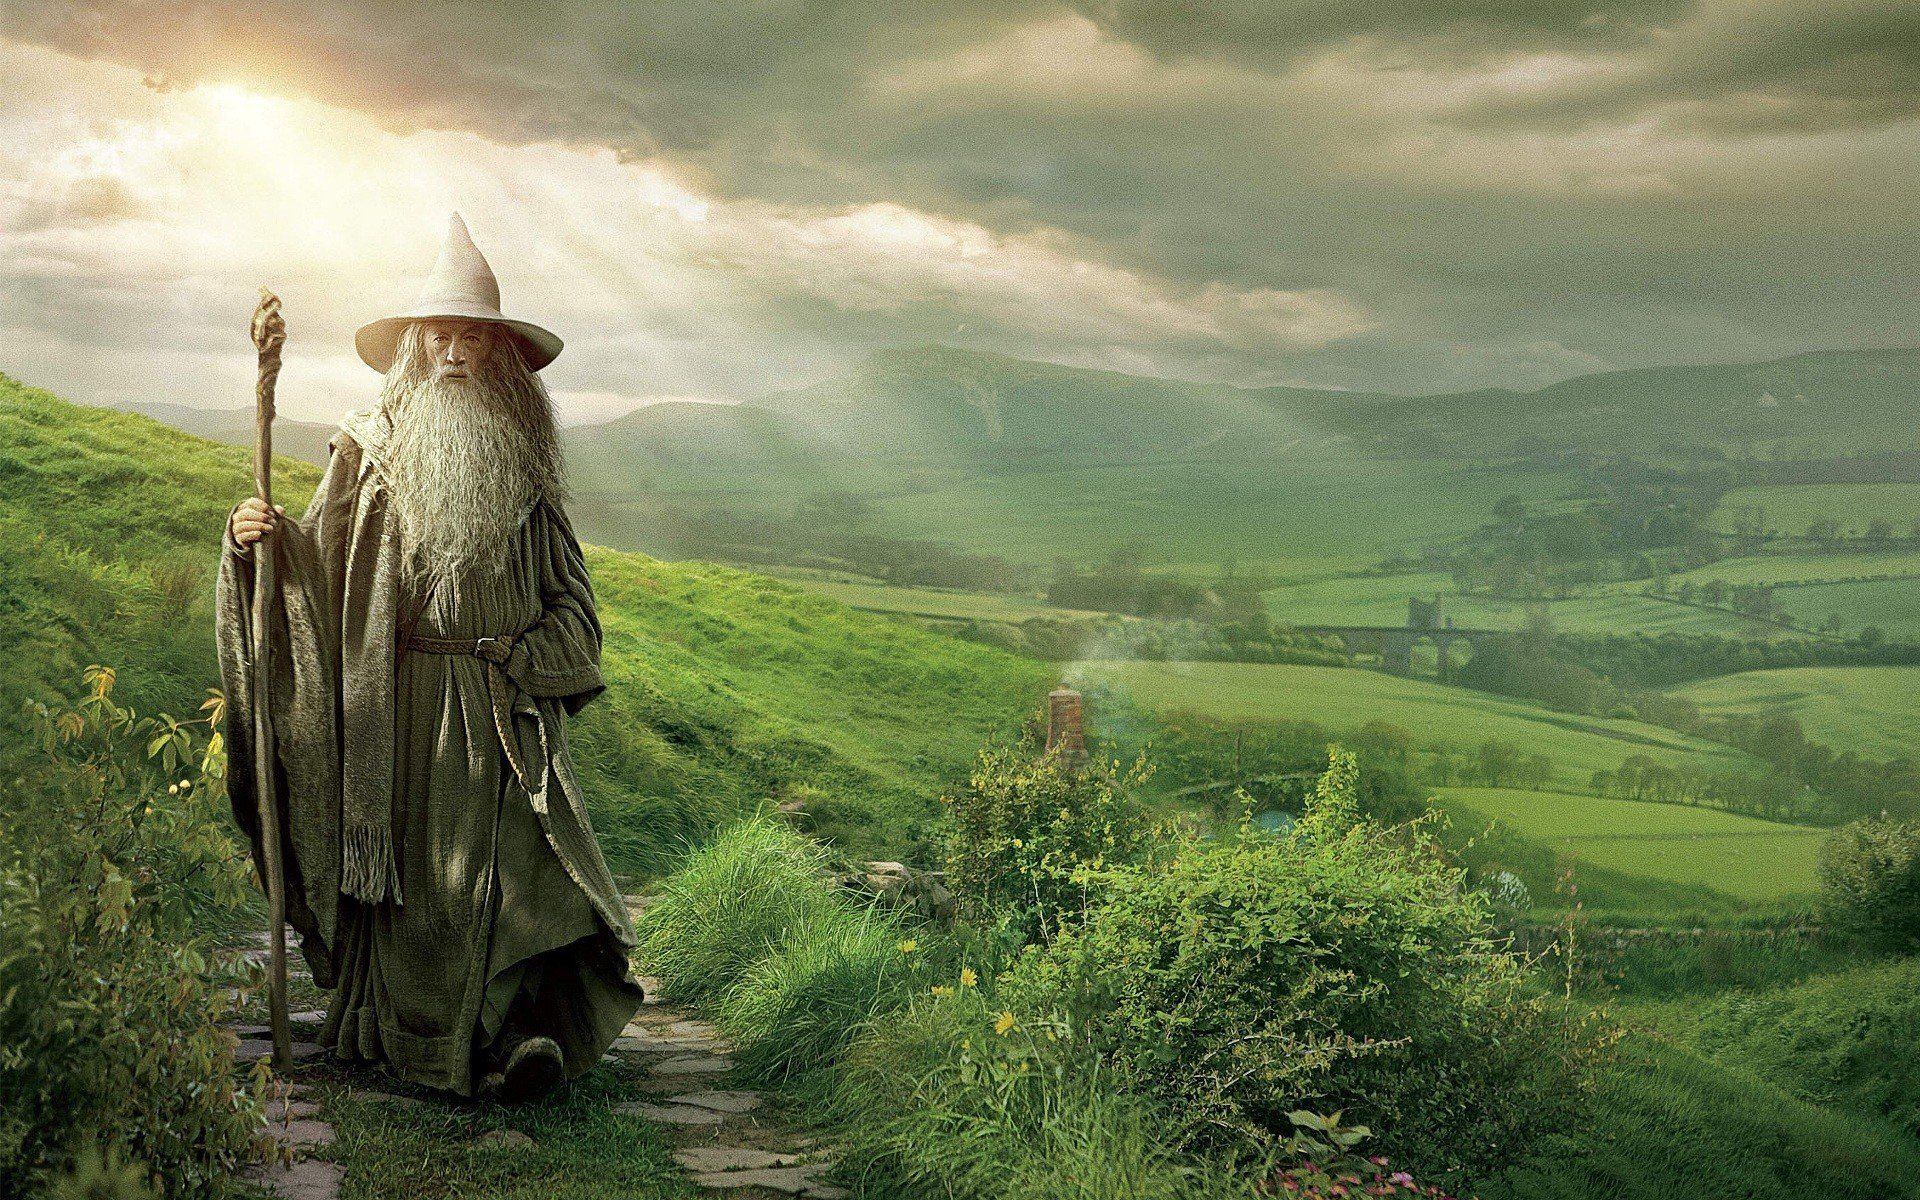 Green nature movies Gandalf wizards The .wallpaperup.com